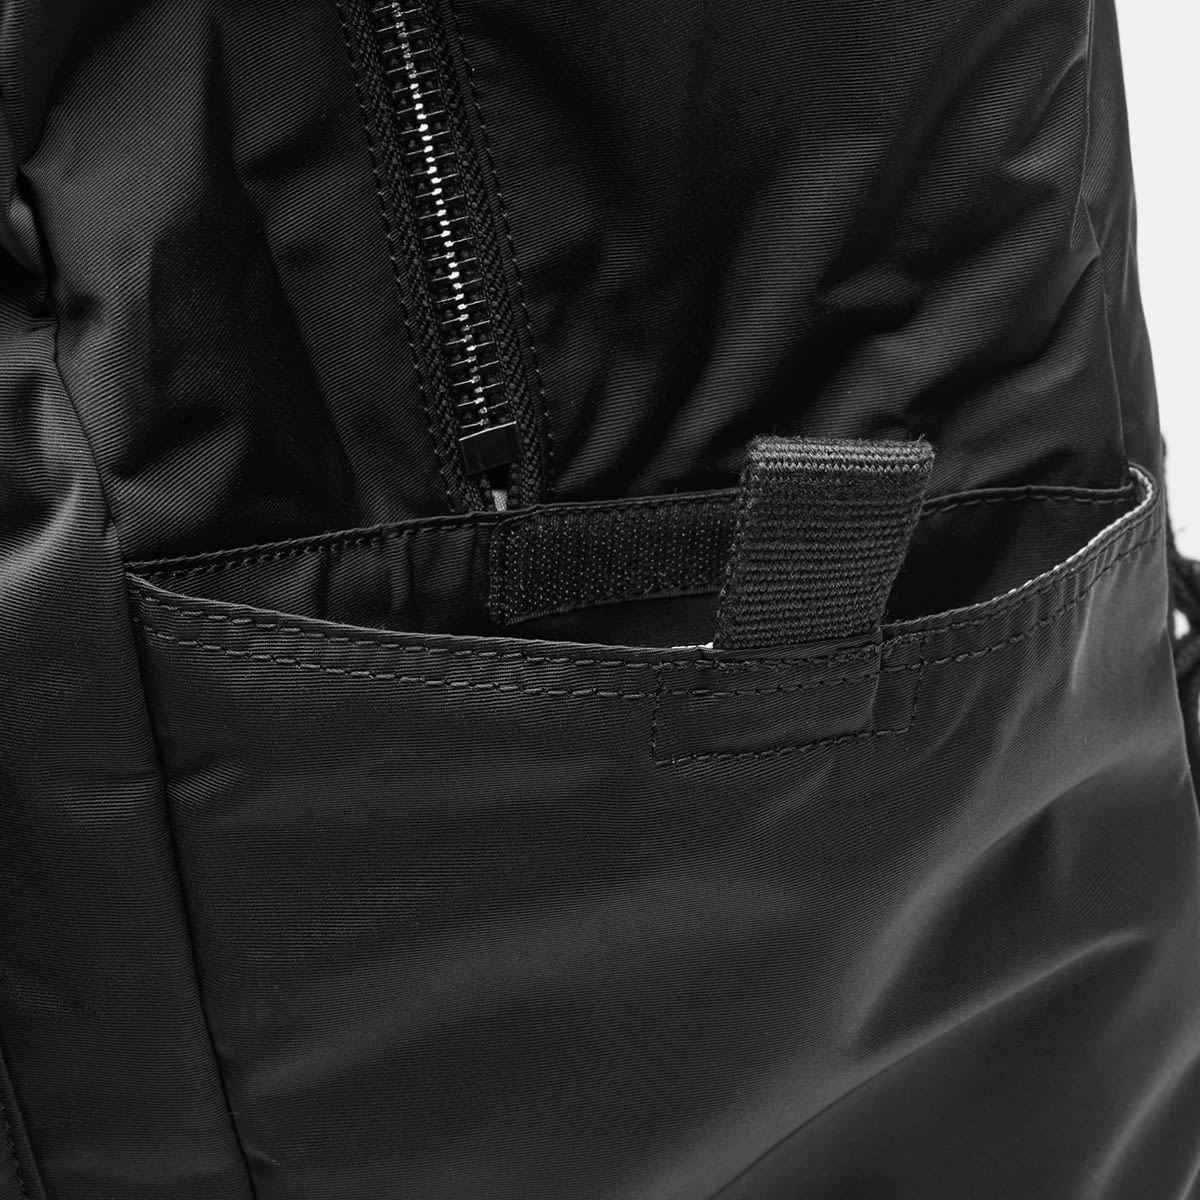 Converse x Rick Owens DRKSHDW Oversized Backpack (Black) | END. Launches